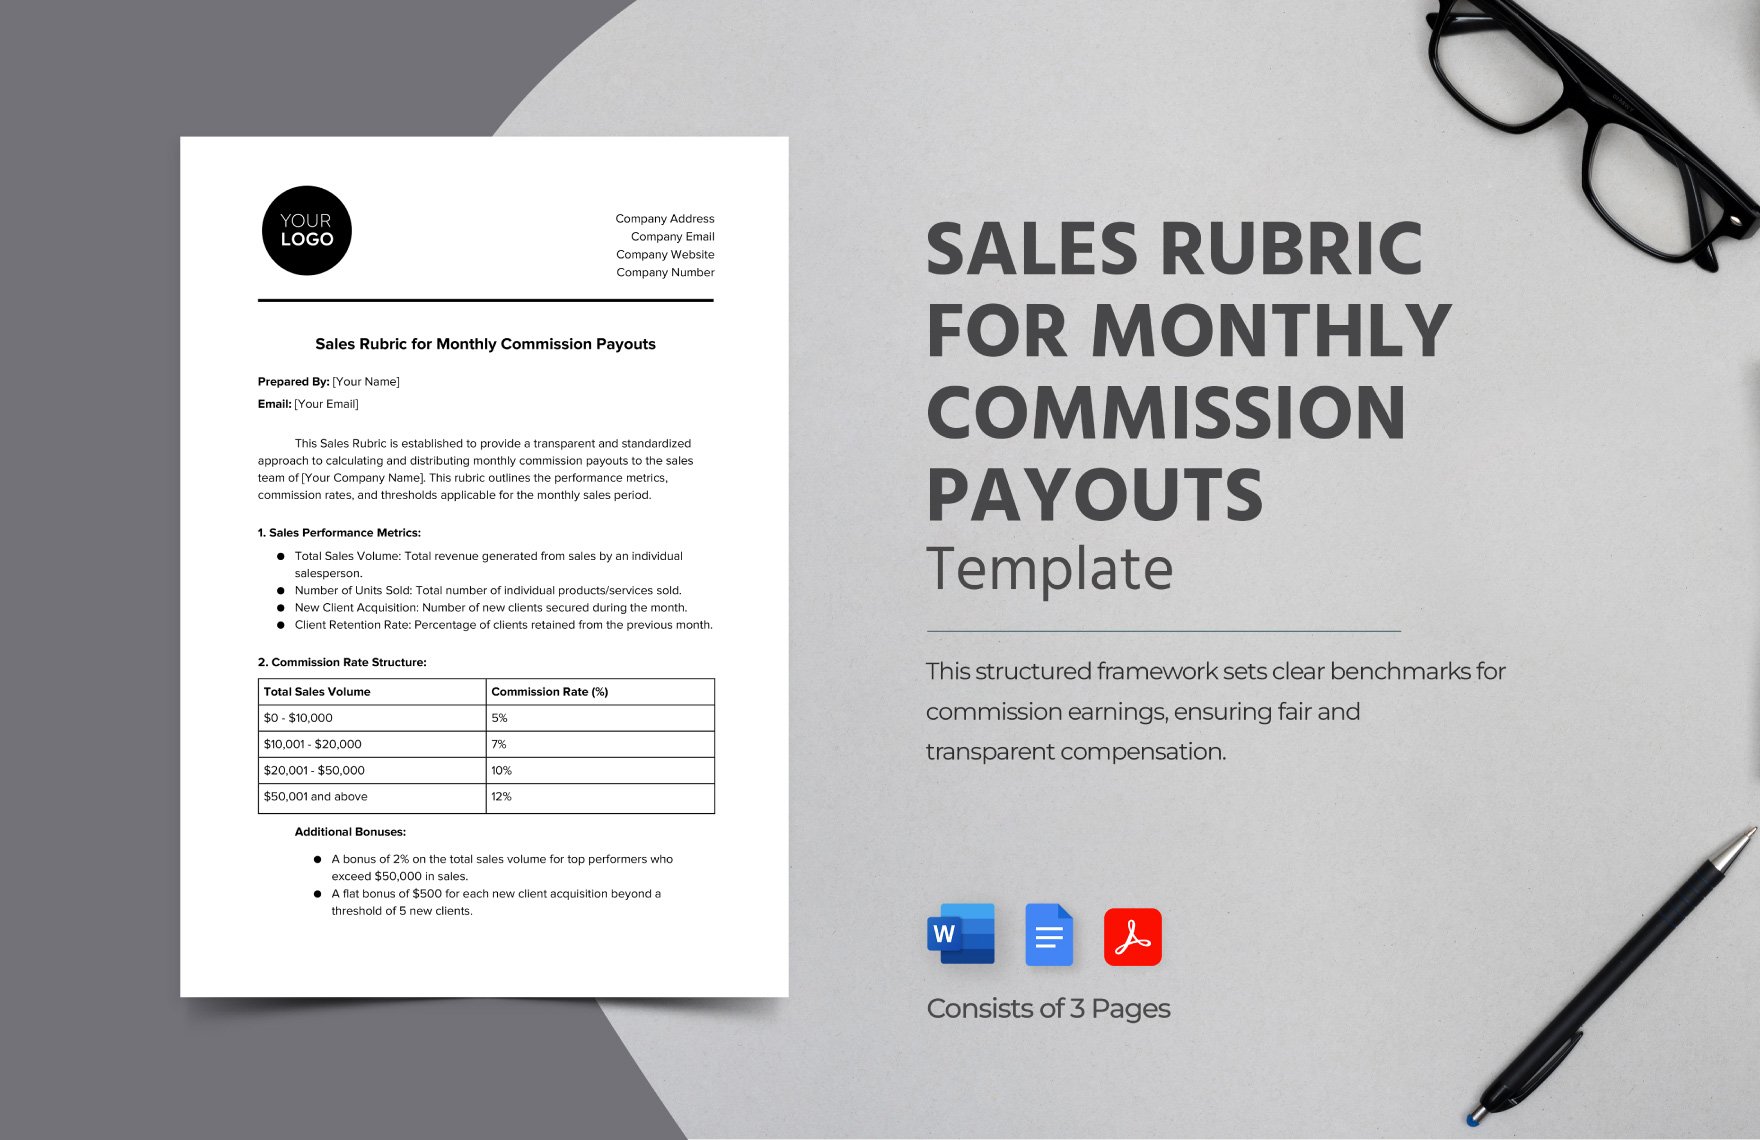 Sales Rubric for Monthly Commission Payouts Template in Word, Google Docs, PDF